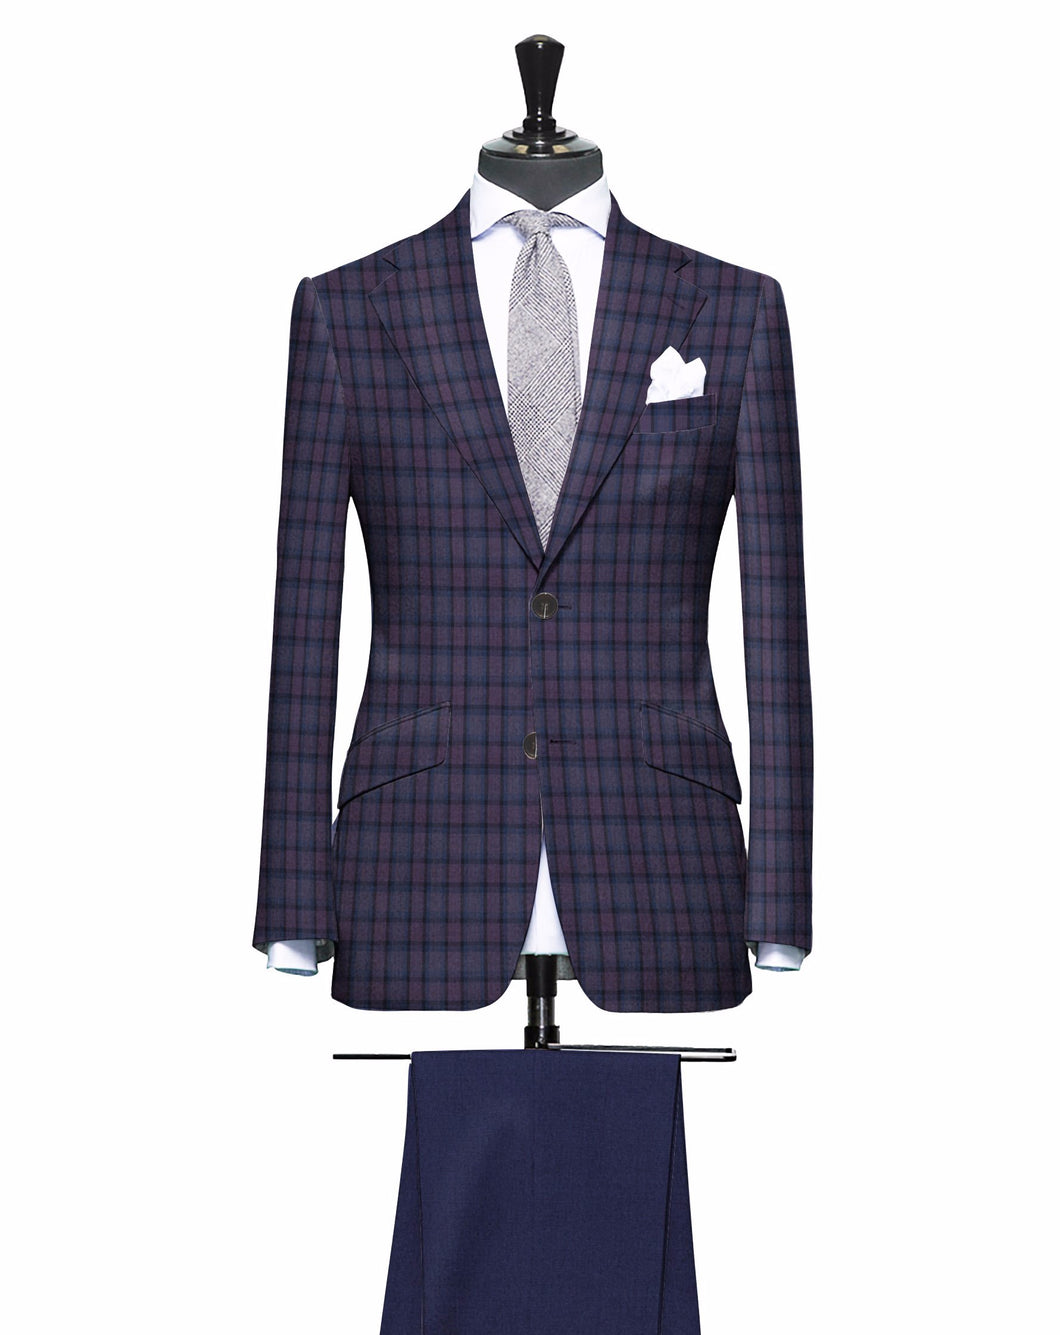 Deep Plum and Blue Plaid Pattern with Matching Pants, Super 150, Wool